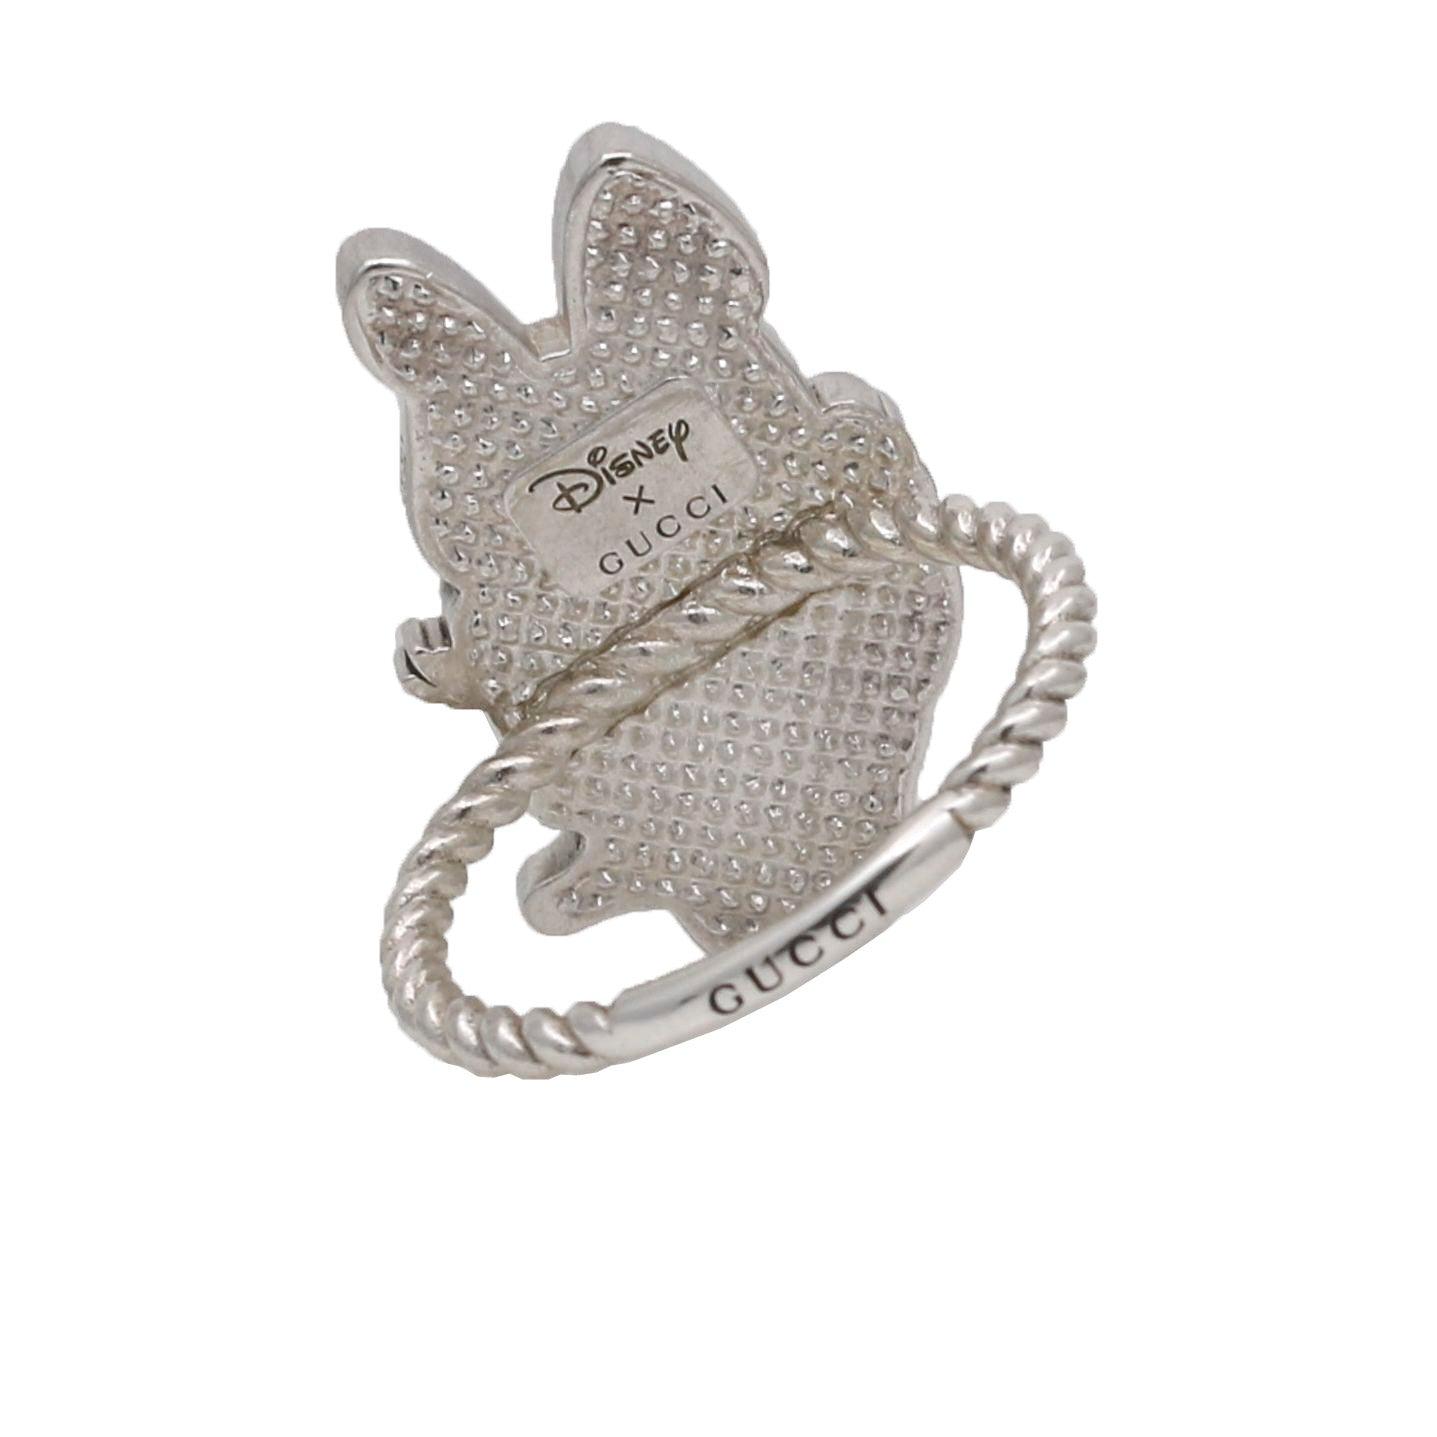 Gucci Disney X Daisy Duck Ring in Sterling Silver - 31 Jewels Inc.